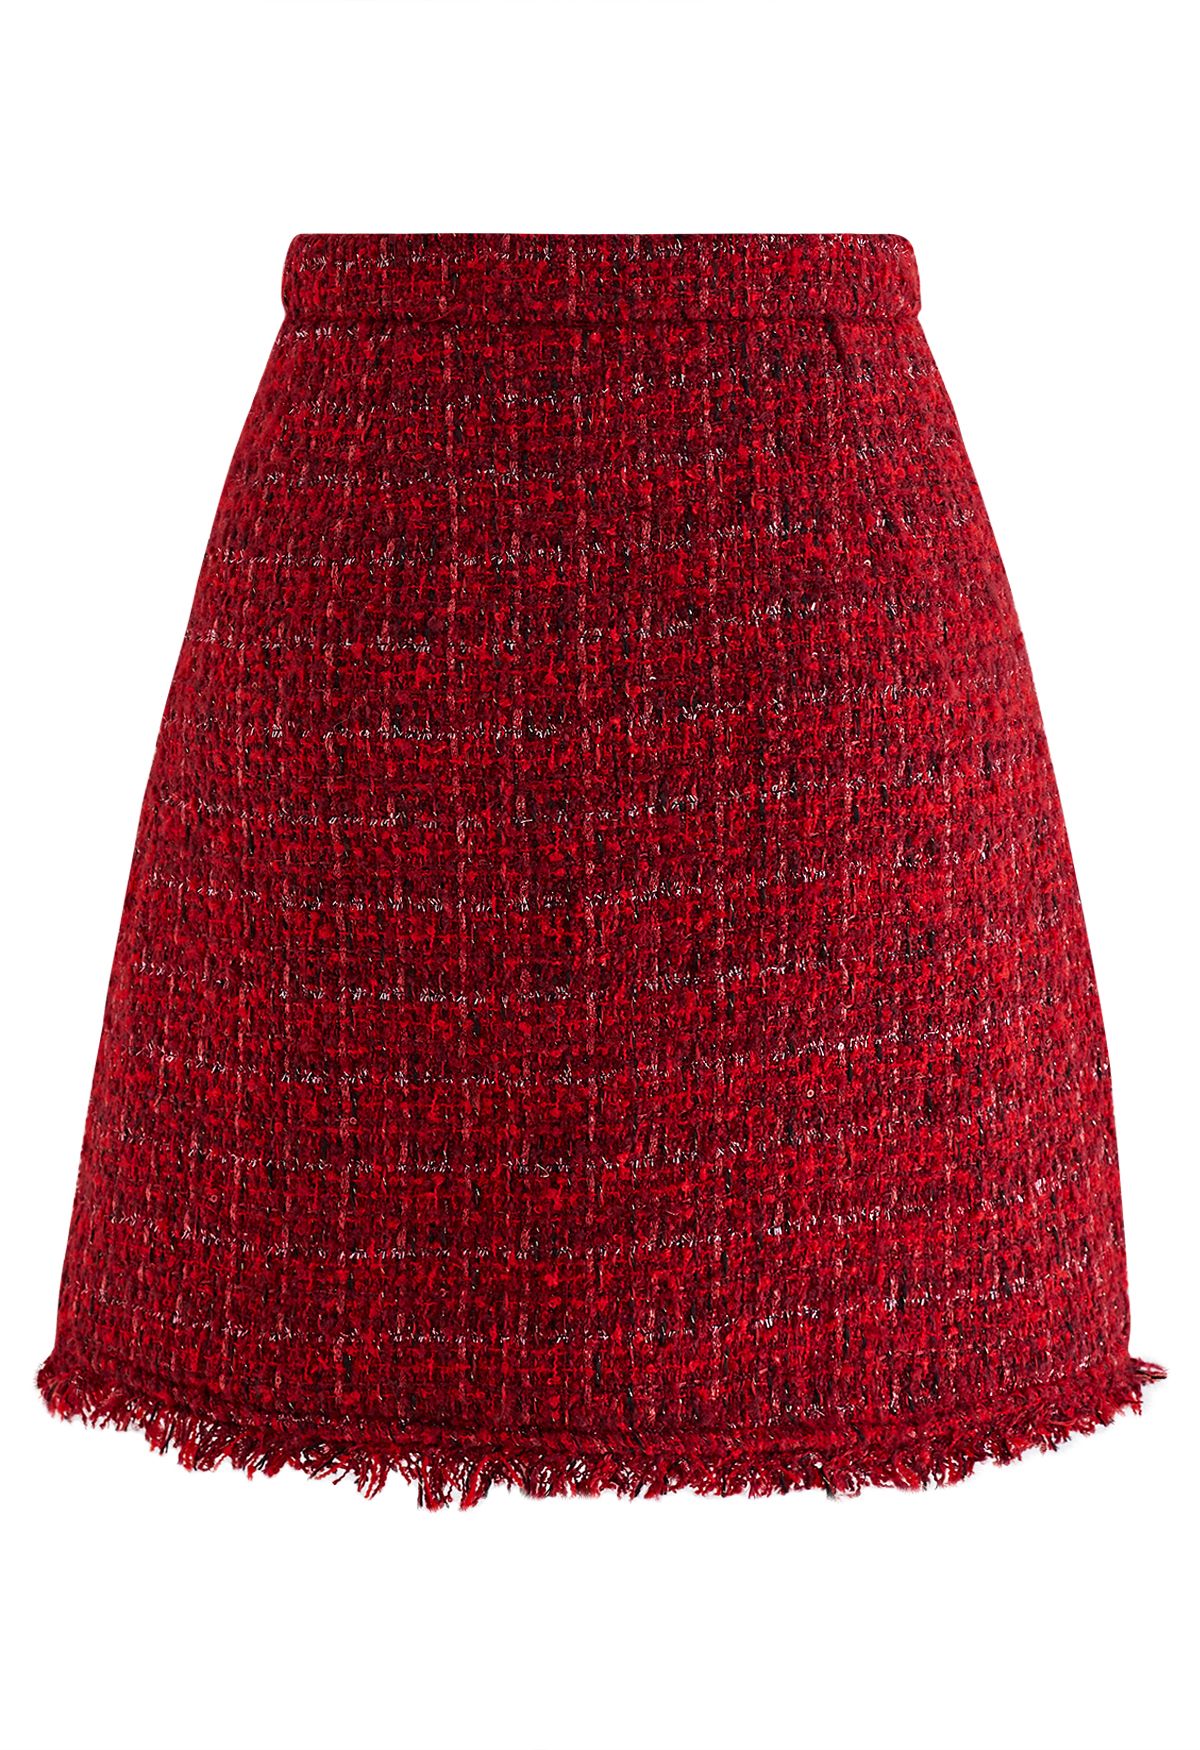 Grid Tweed Mini Bud Skirt in Red - Retro, Indie and Unique Fashion